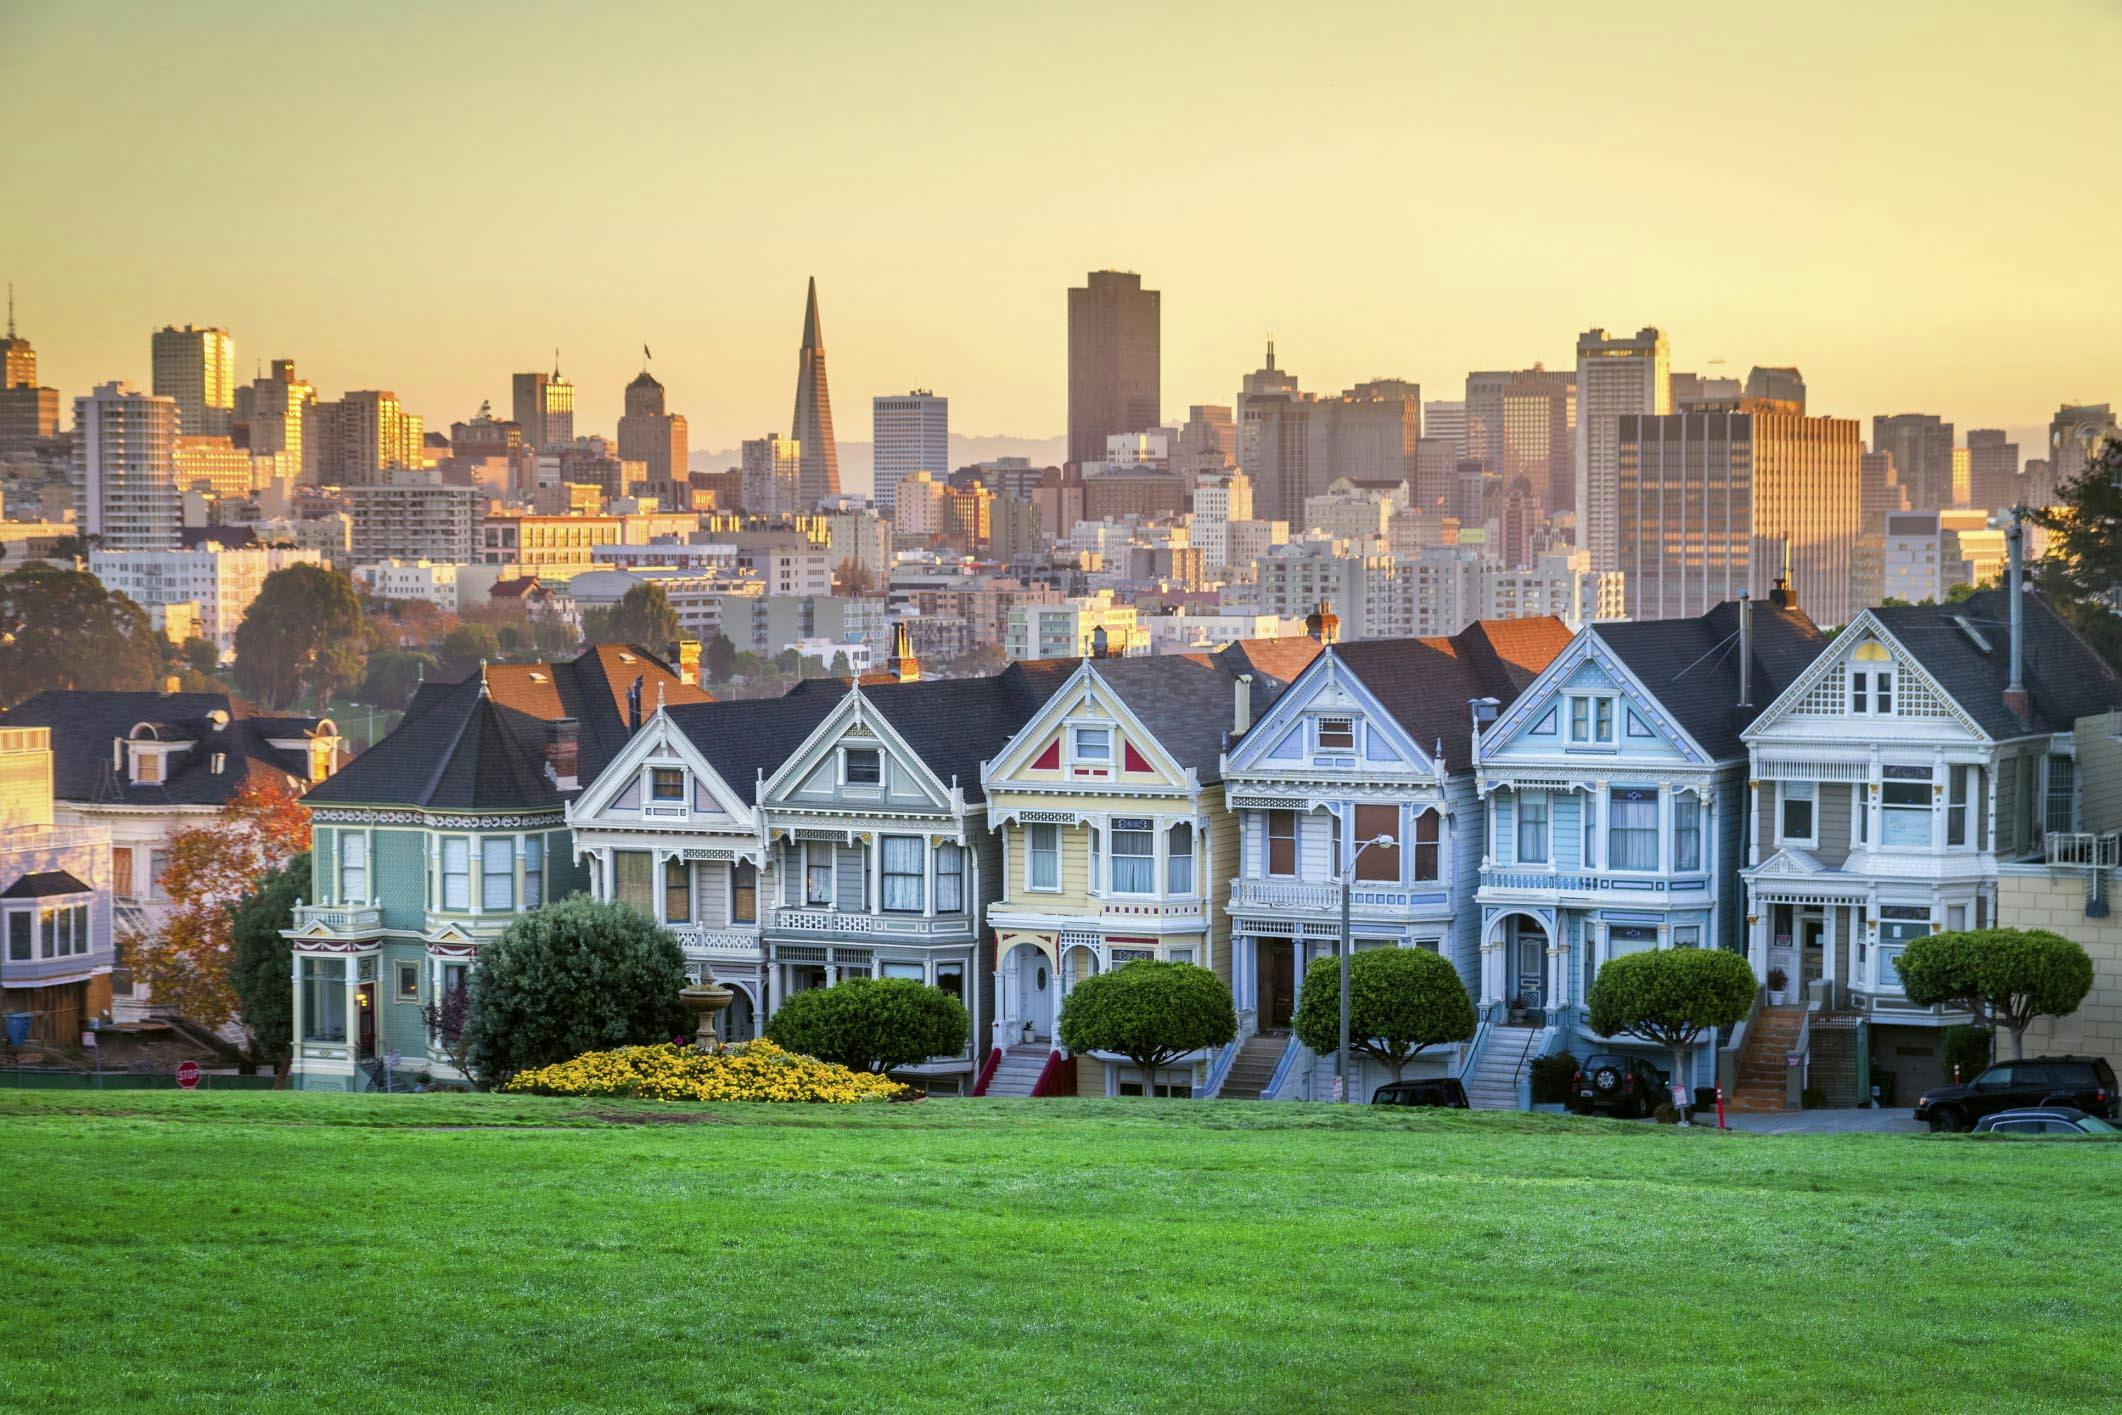 A Star is Reborn―San Francisco’s Famous Painted Lady | NanaWall